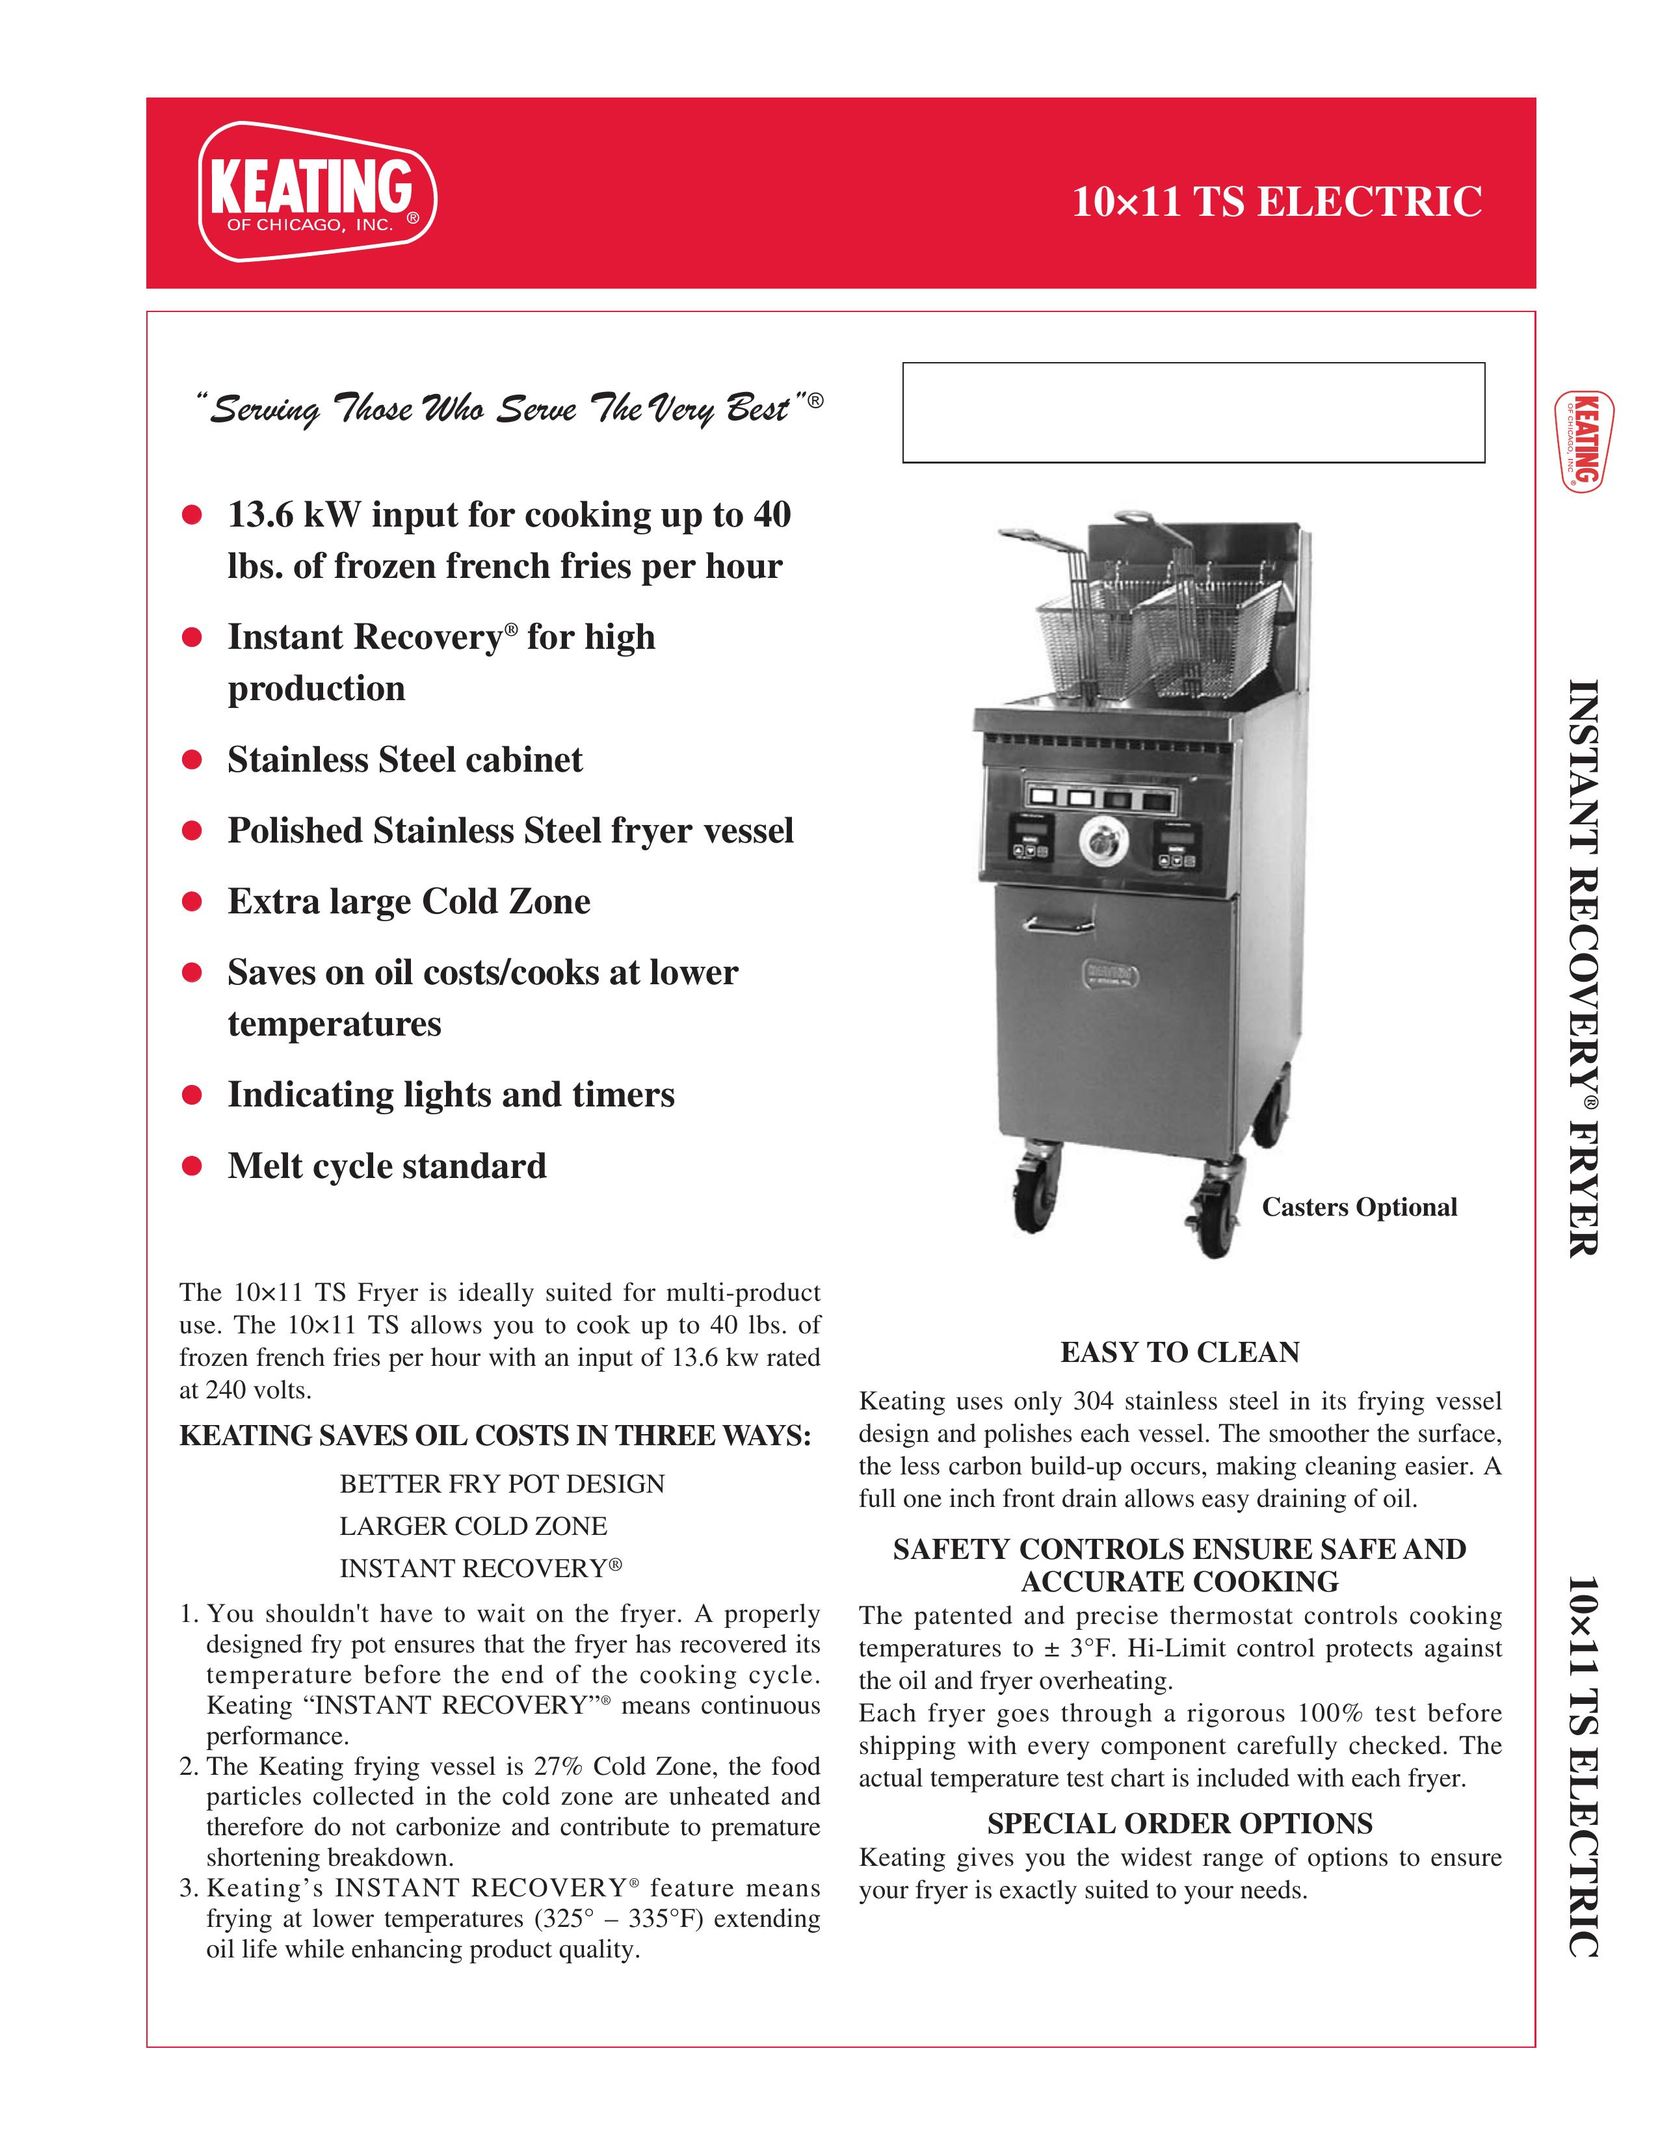 Keating Of Chicago 10x11 TS Fryer User Manual